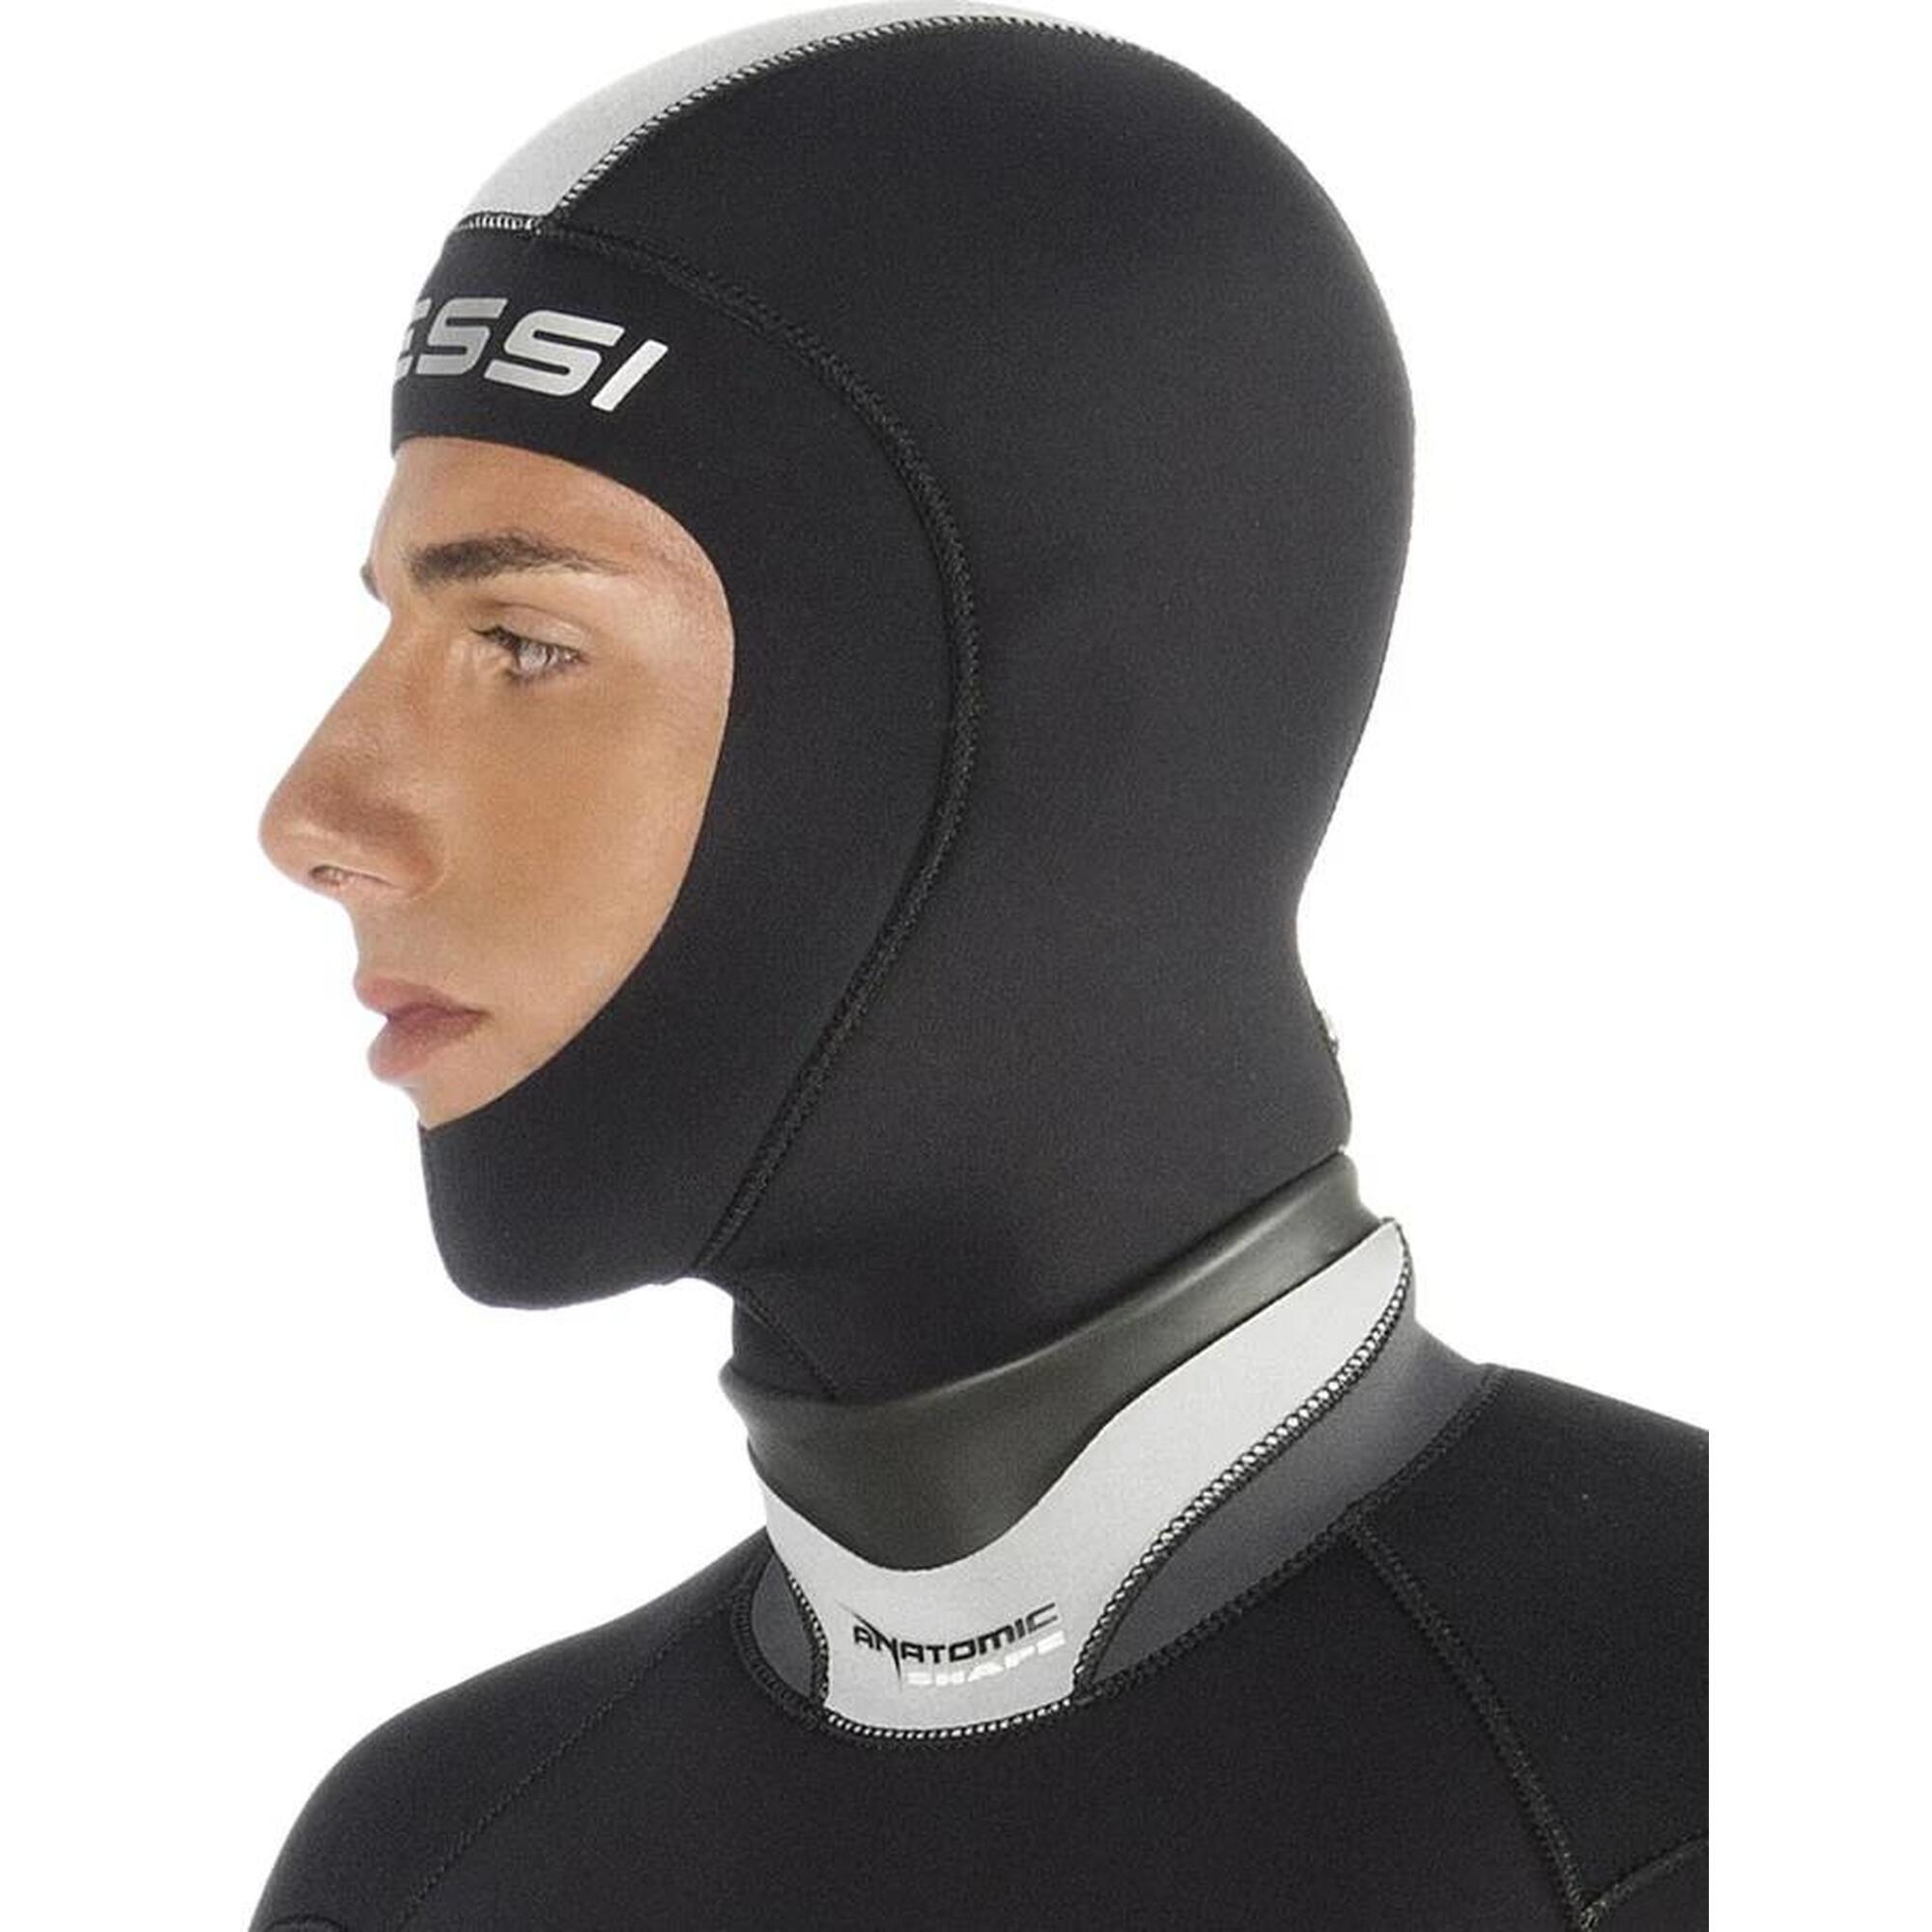 Hood Plus Women's Wetsuit Hood With Safety Snap Hook